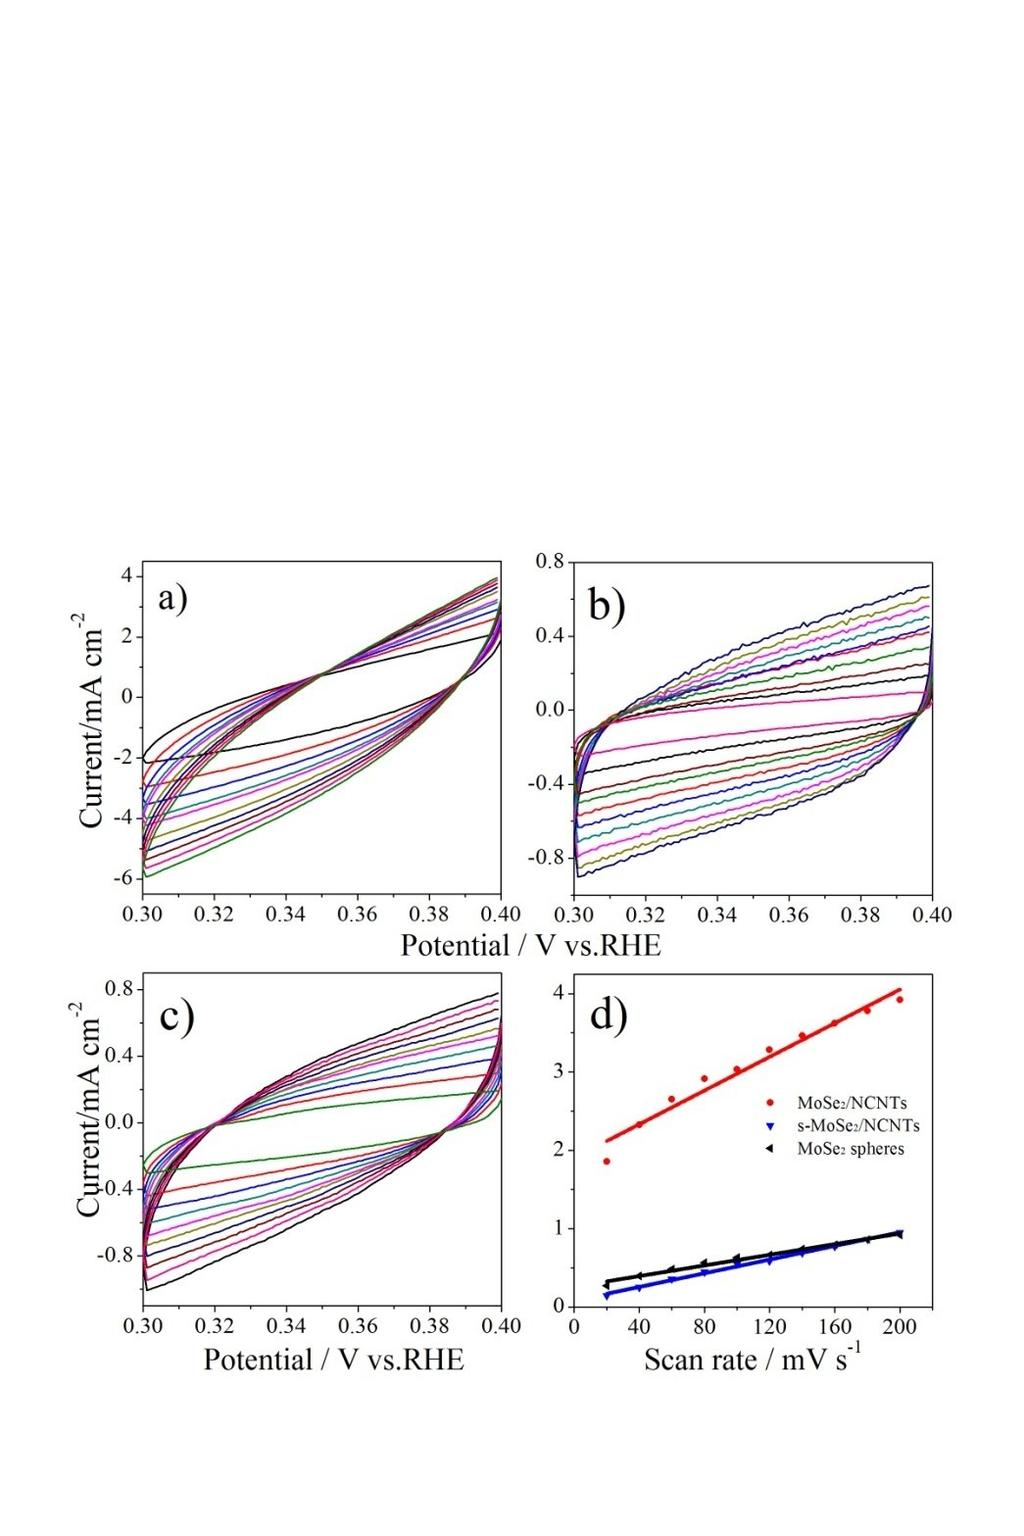 Figure S13 Cyclic voltammograms in the region of 0.3 0.4 V vs. RHE for a) MoSe 2 /NCNTs, b) s-mose 2 /NCNTs, c) MoSe 2 spheres and d) The differences in current density (ΔJ = J a -J c ) at 0.35 V vs.